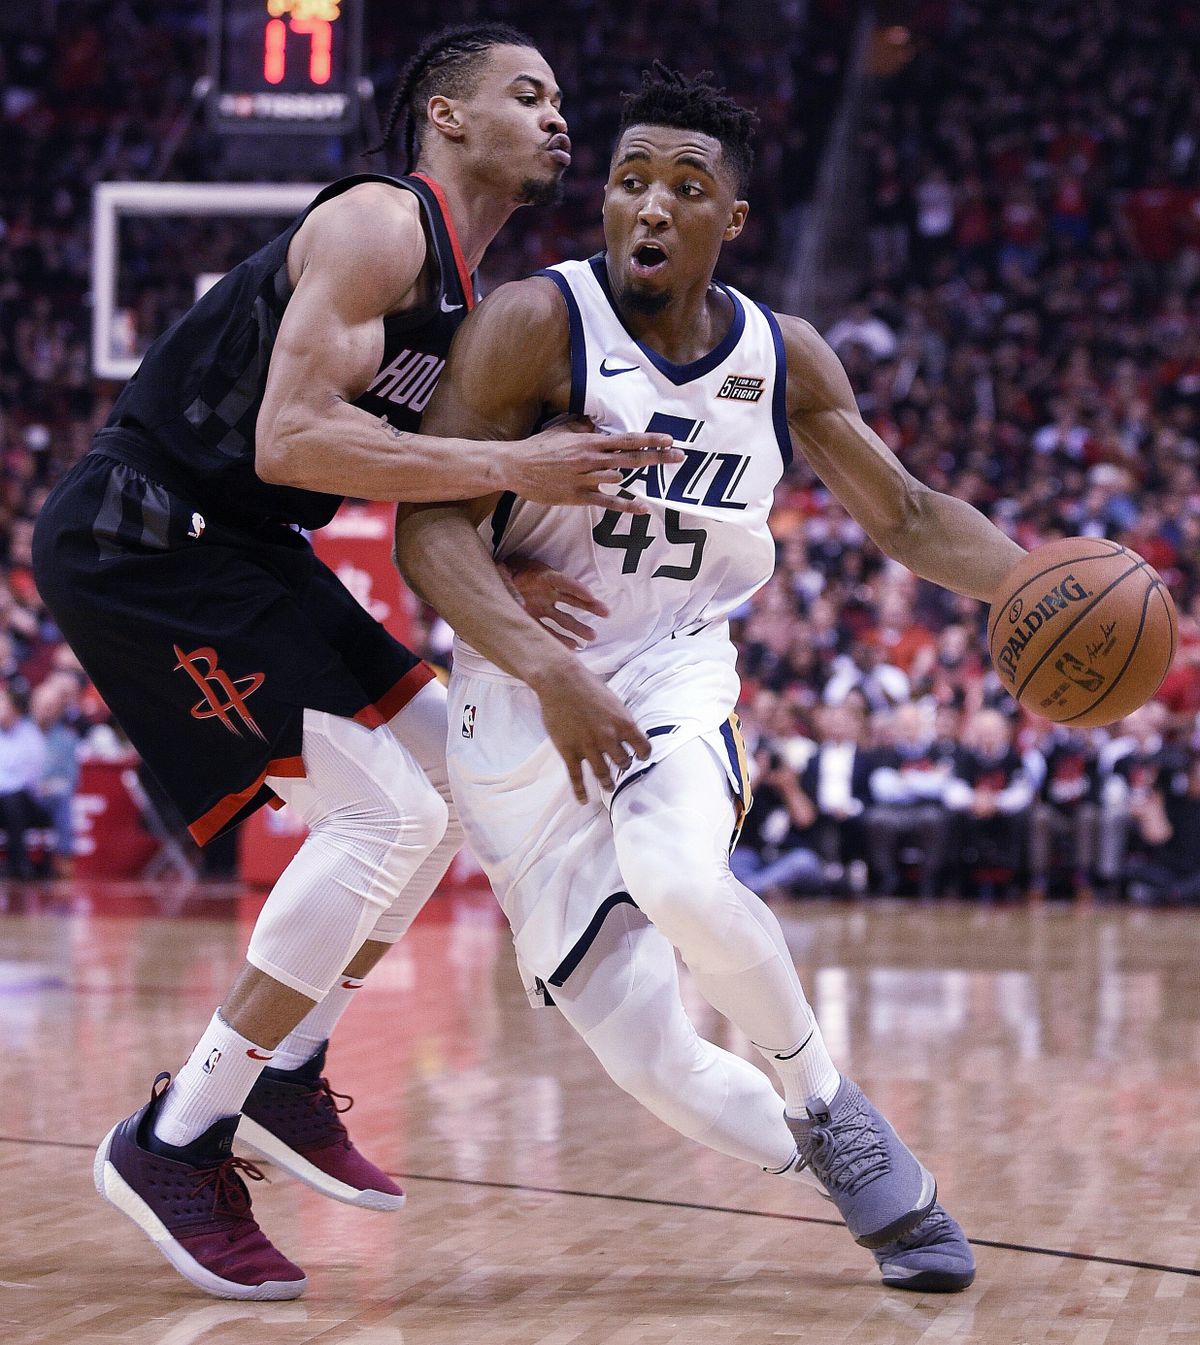 Utah Jazz guard Donovan Mitchell, right, dribbles as Houston Rockets guard Gerald Green defends during the second half in Game 5 of an NBA basketball second-round playoff series, Tuesday, May 8, 2018, in Houston. (Eric Christian Smith / Associated Press)